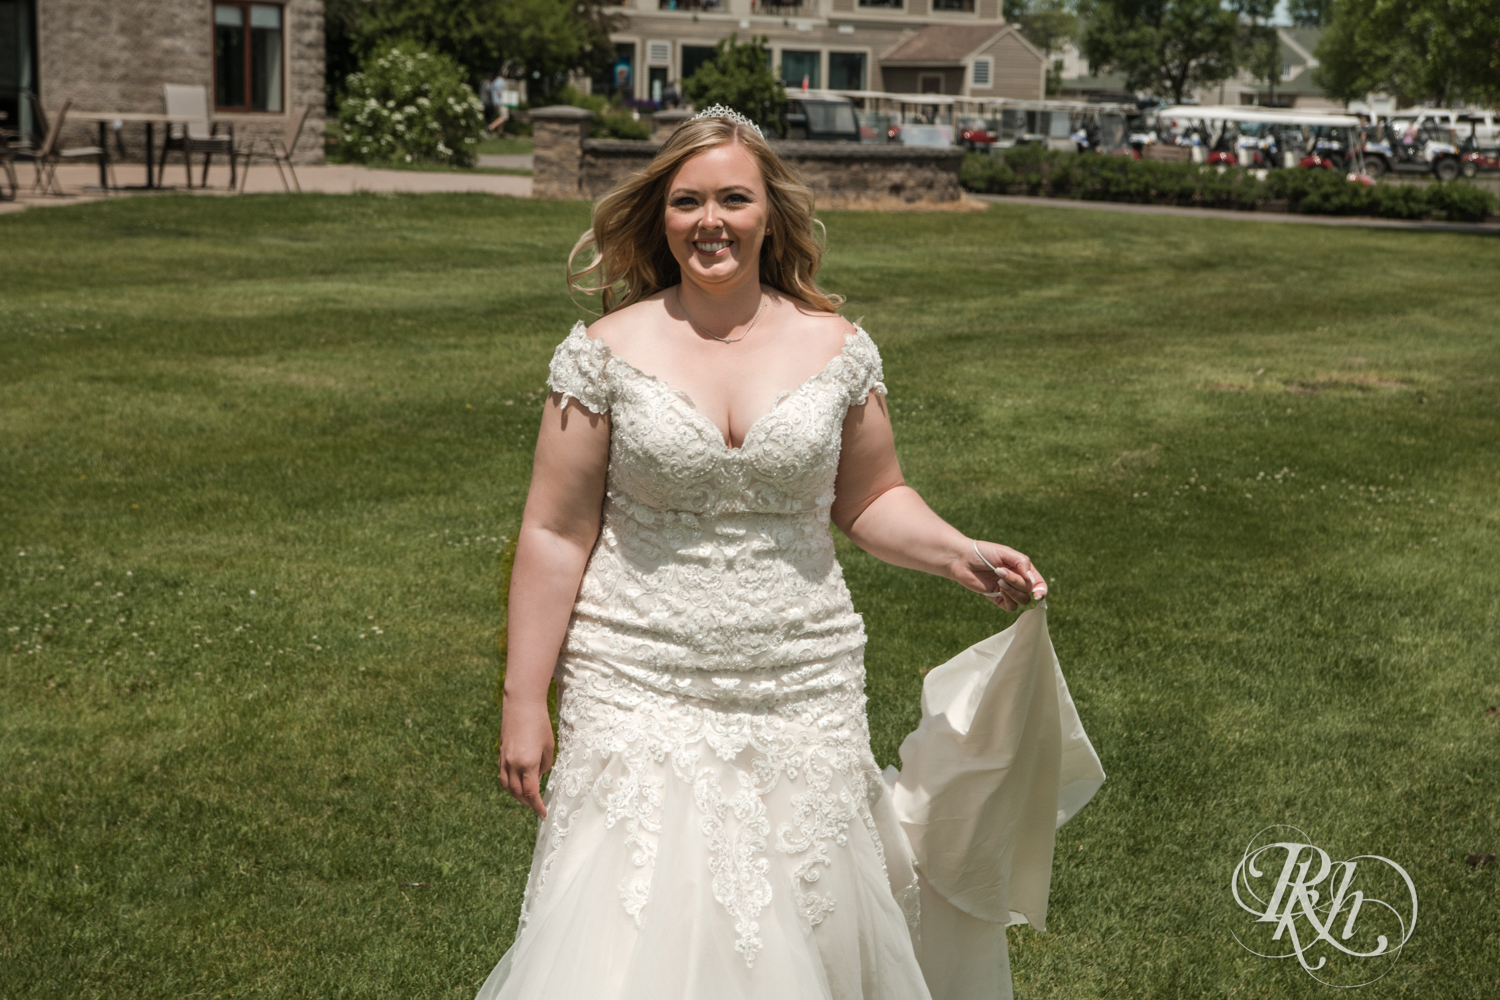 Bride and groom share first look at Izatys Resort in Onamia, Minnesota on a summer day.